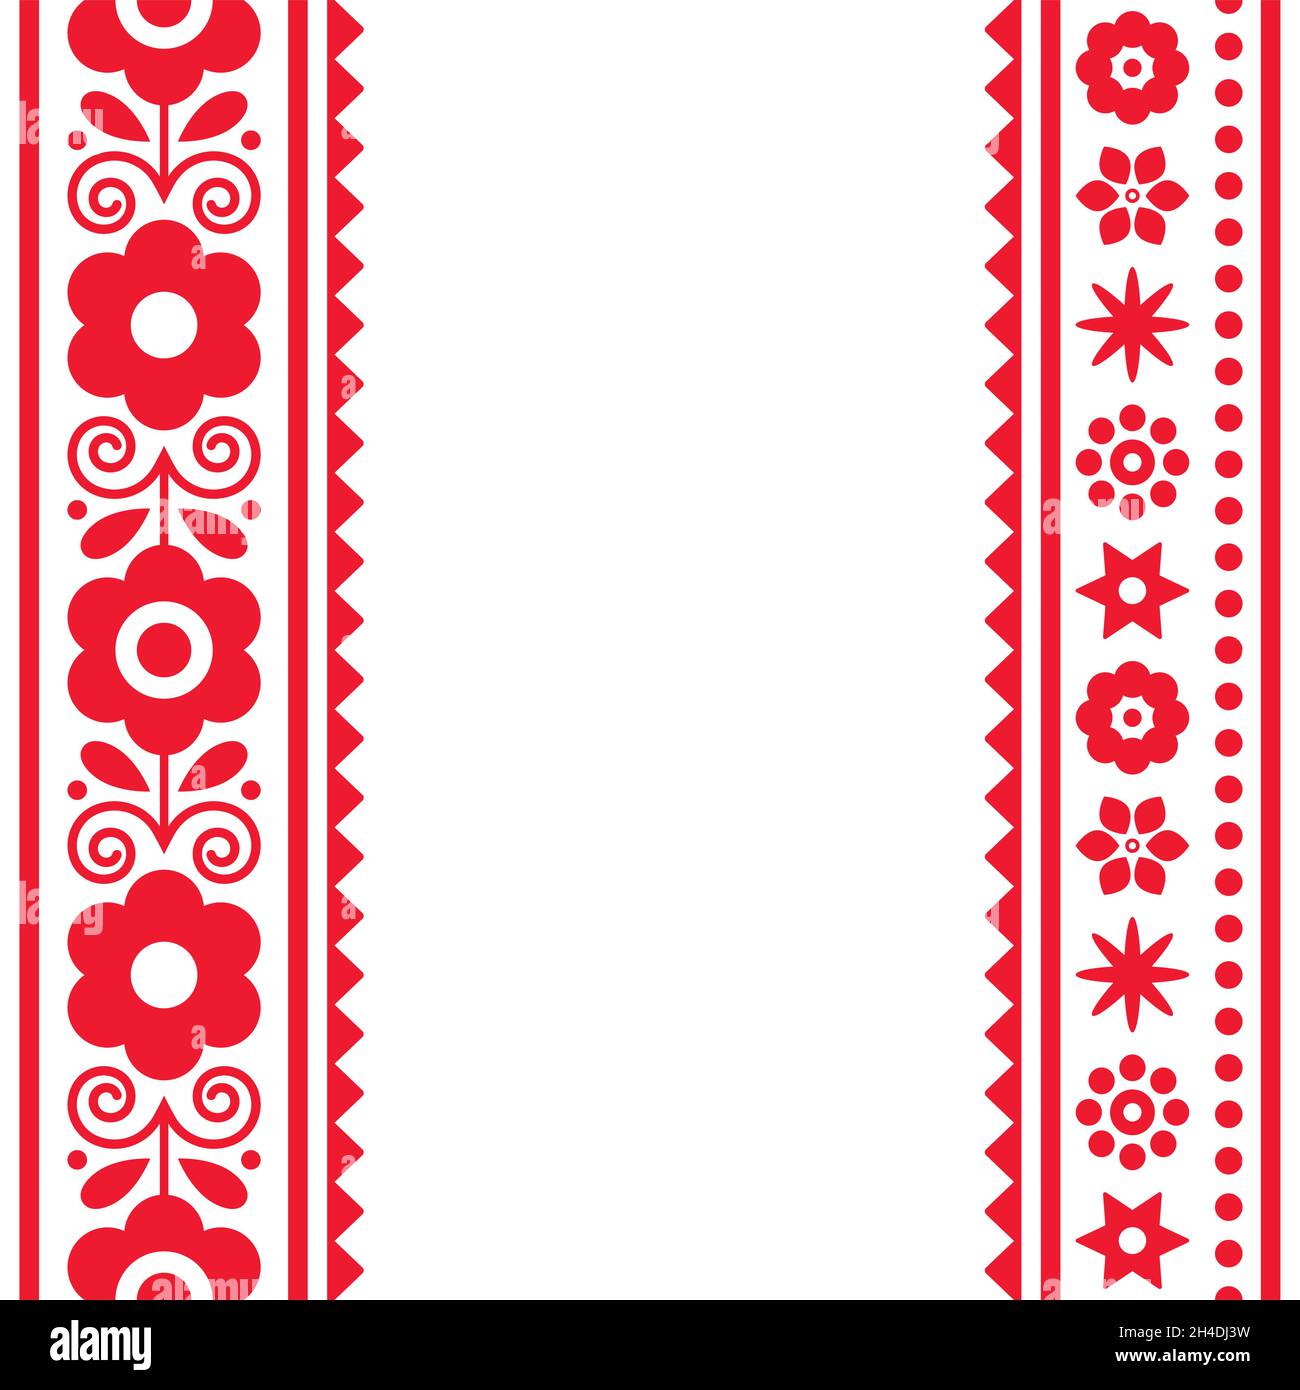 Polish folk art vector greeting card design or wedding invitation with flowers and geometric shapes Stock Vector